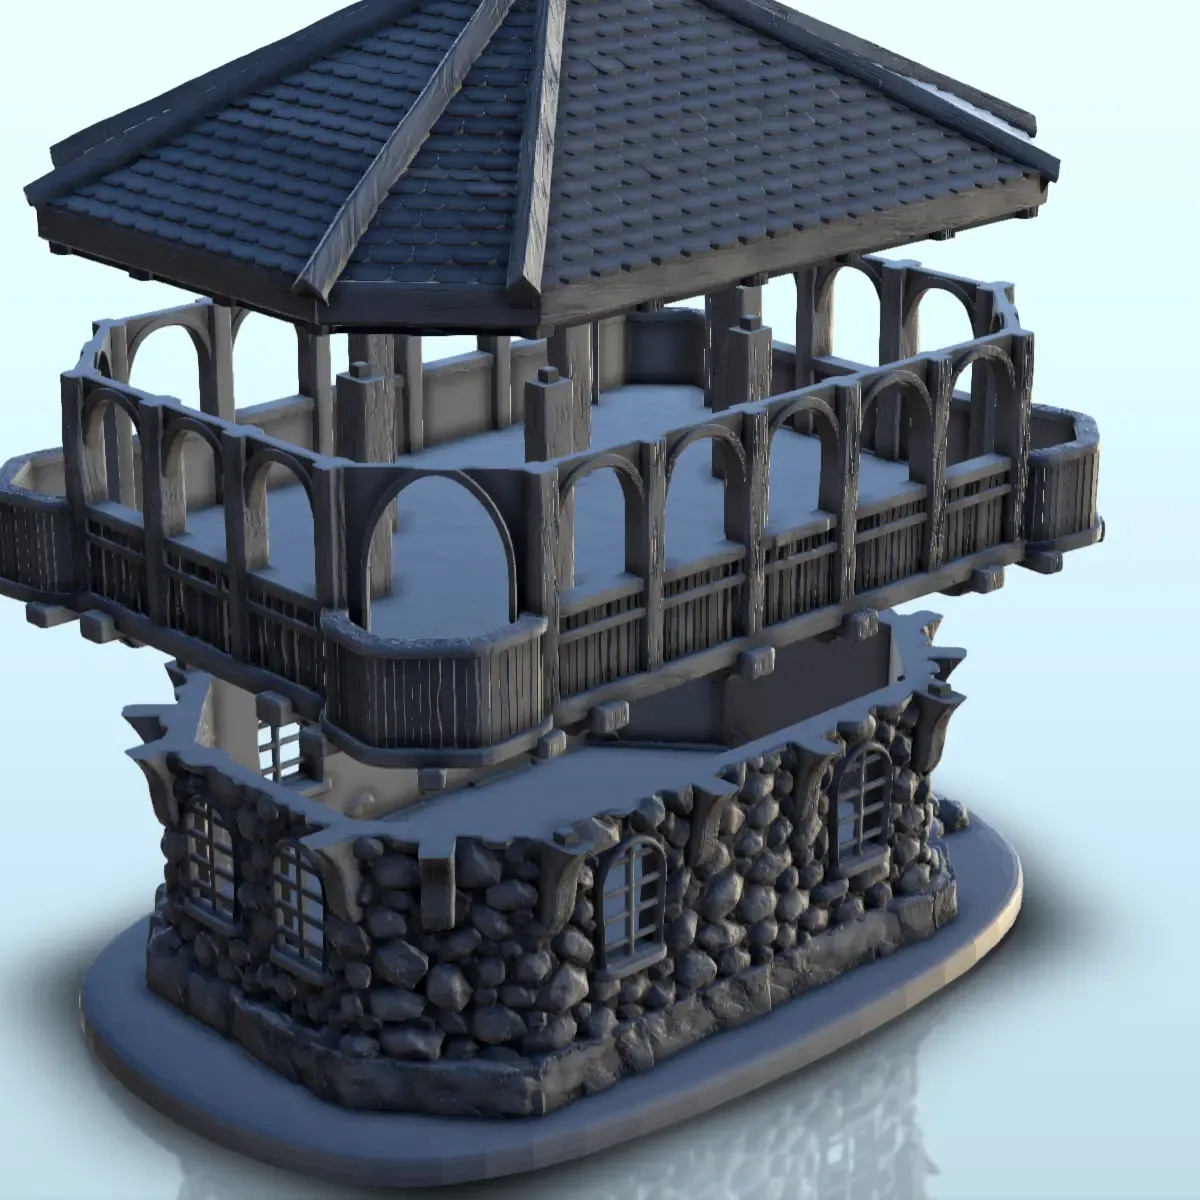 Fancy stone tower with wooden floor and pointed roof (8) - m